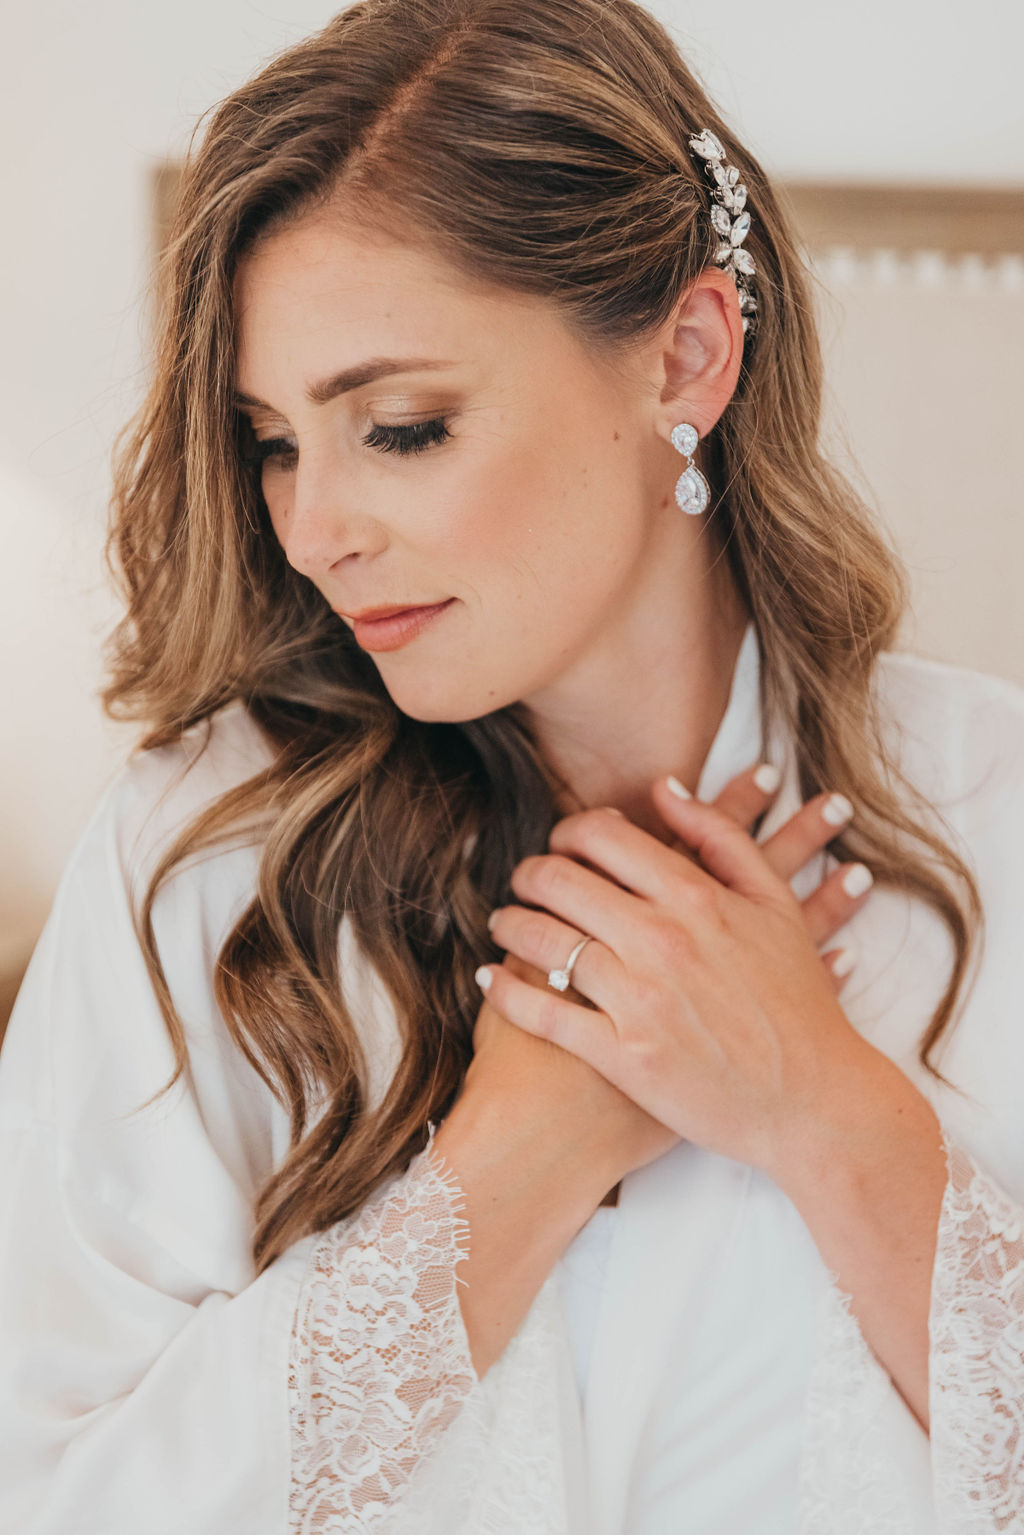 A bride in a white lace robe gently touches her collarbone, looking downwards, with a subtle smile, wearing a delicate hairpiece and earrings.